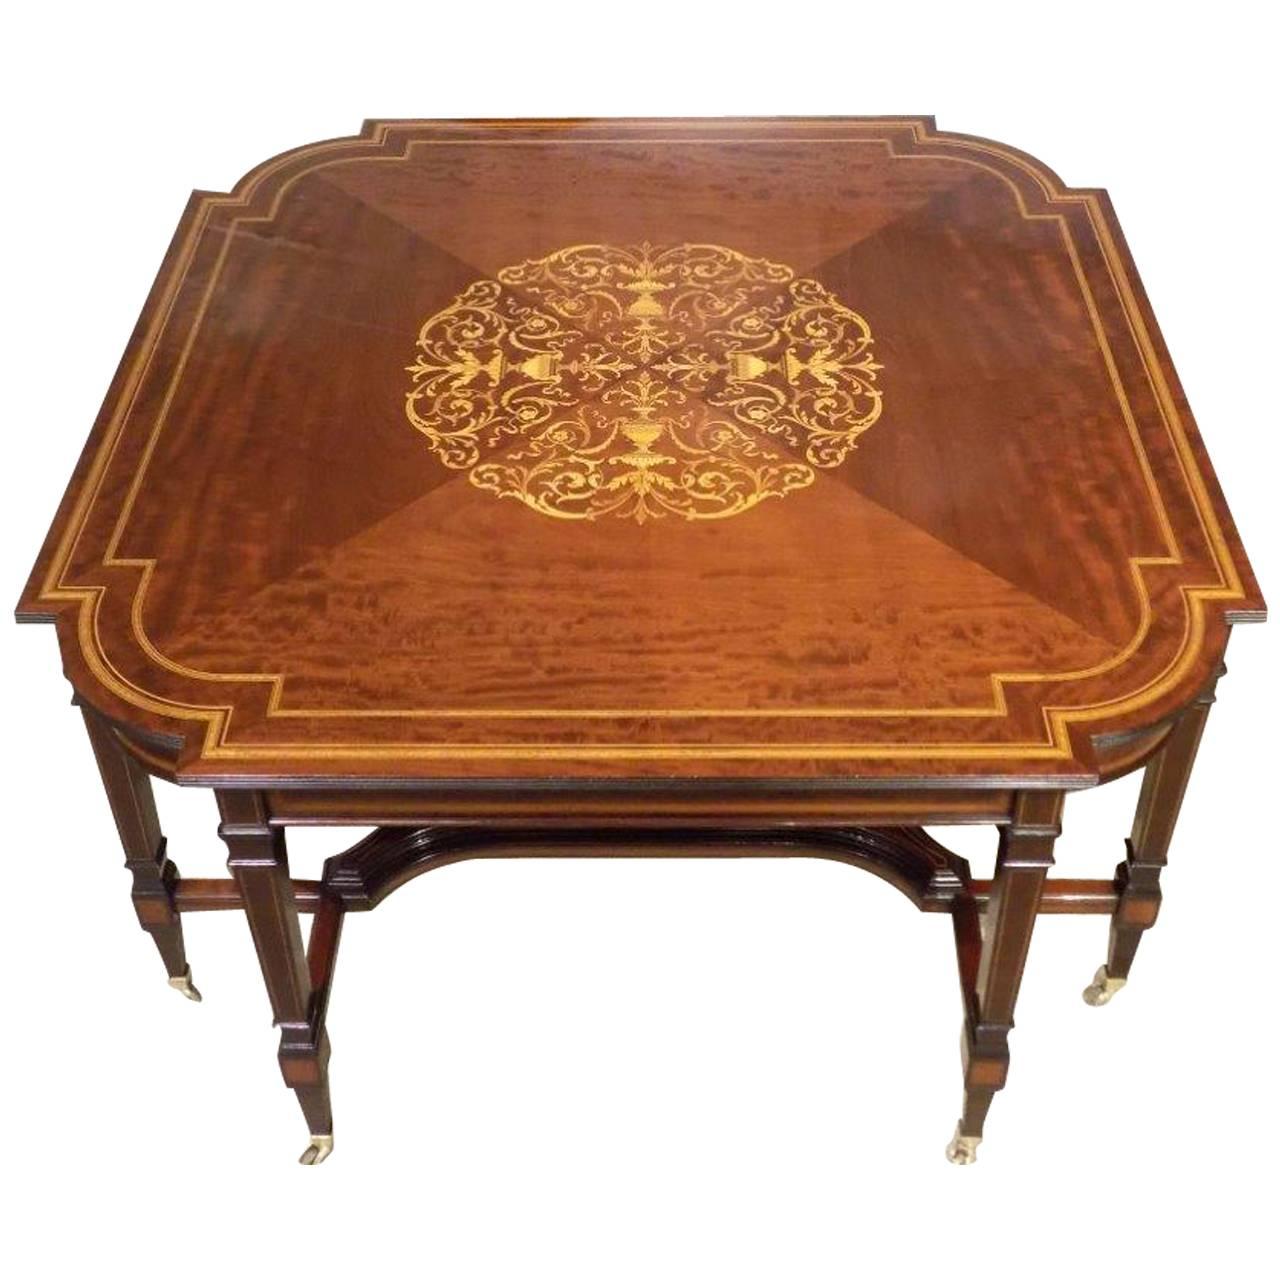 Large and Rare Mahogany Inlaid Edwardian Period Antique Centre Table For Sale